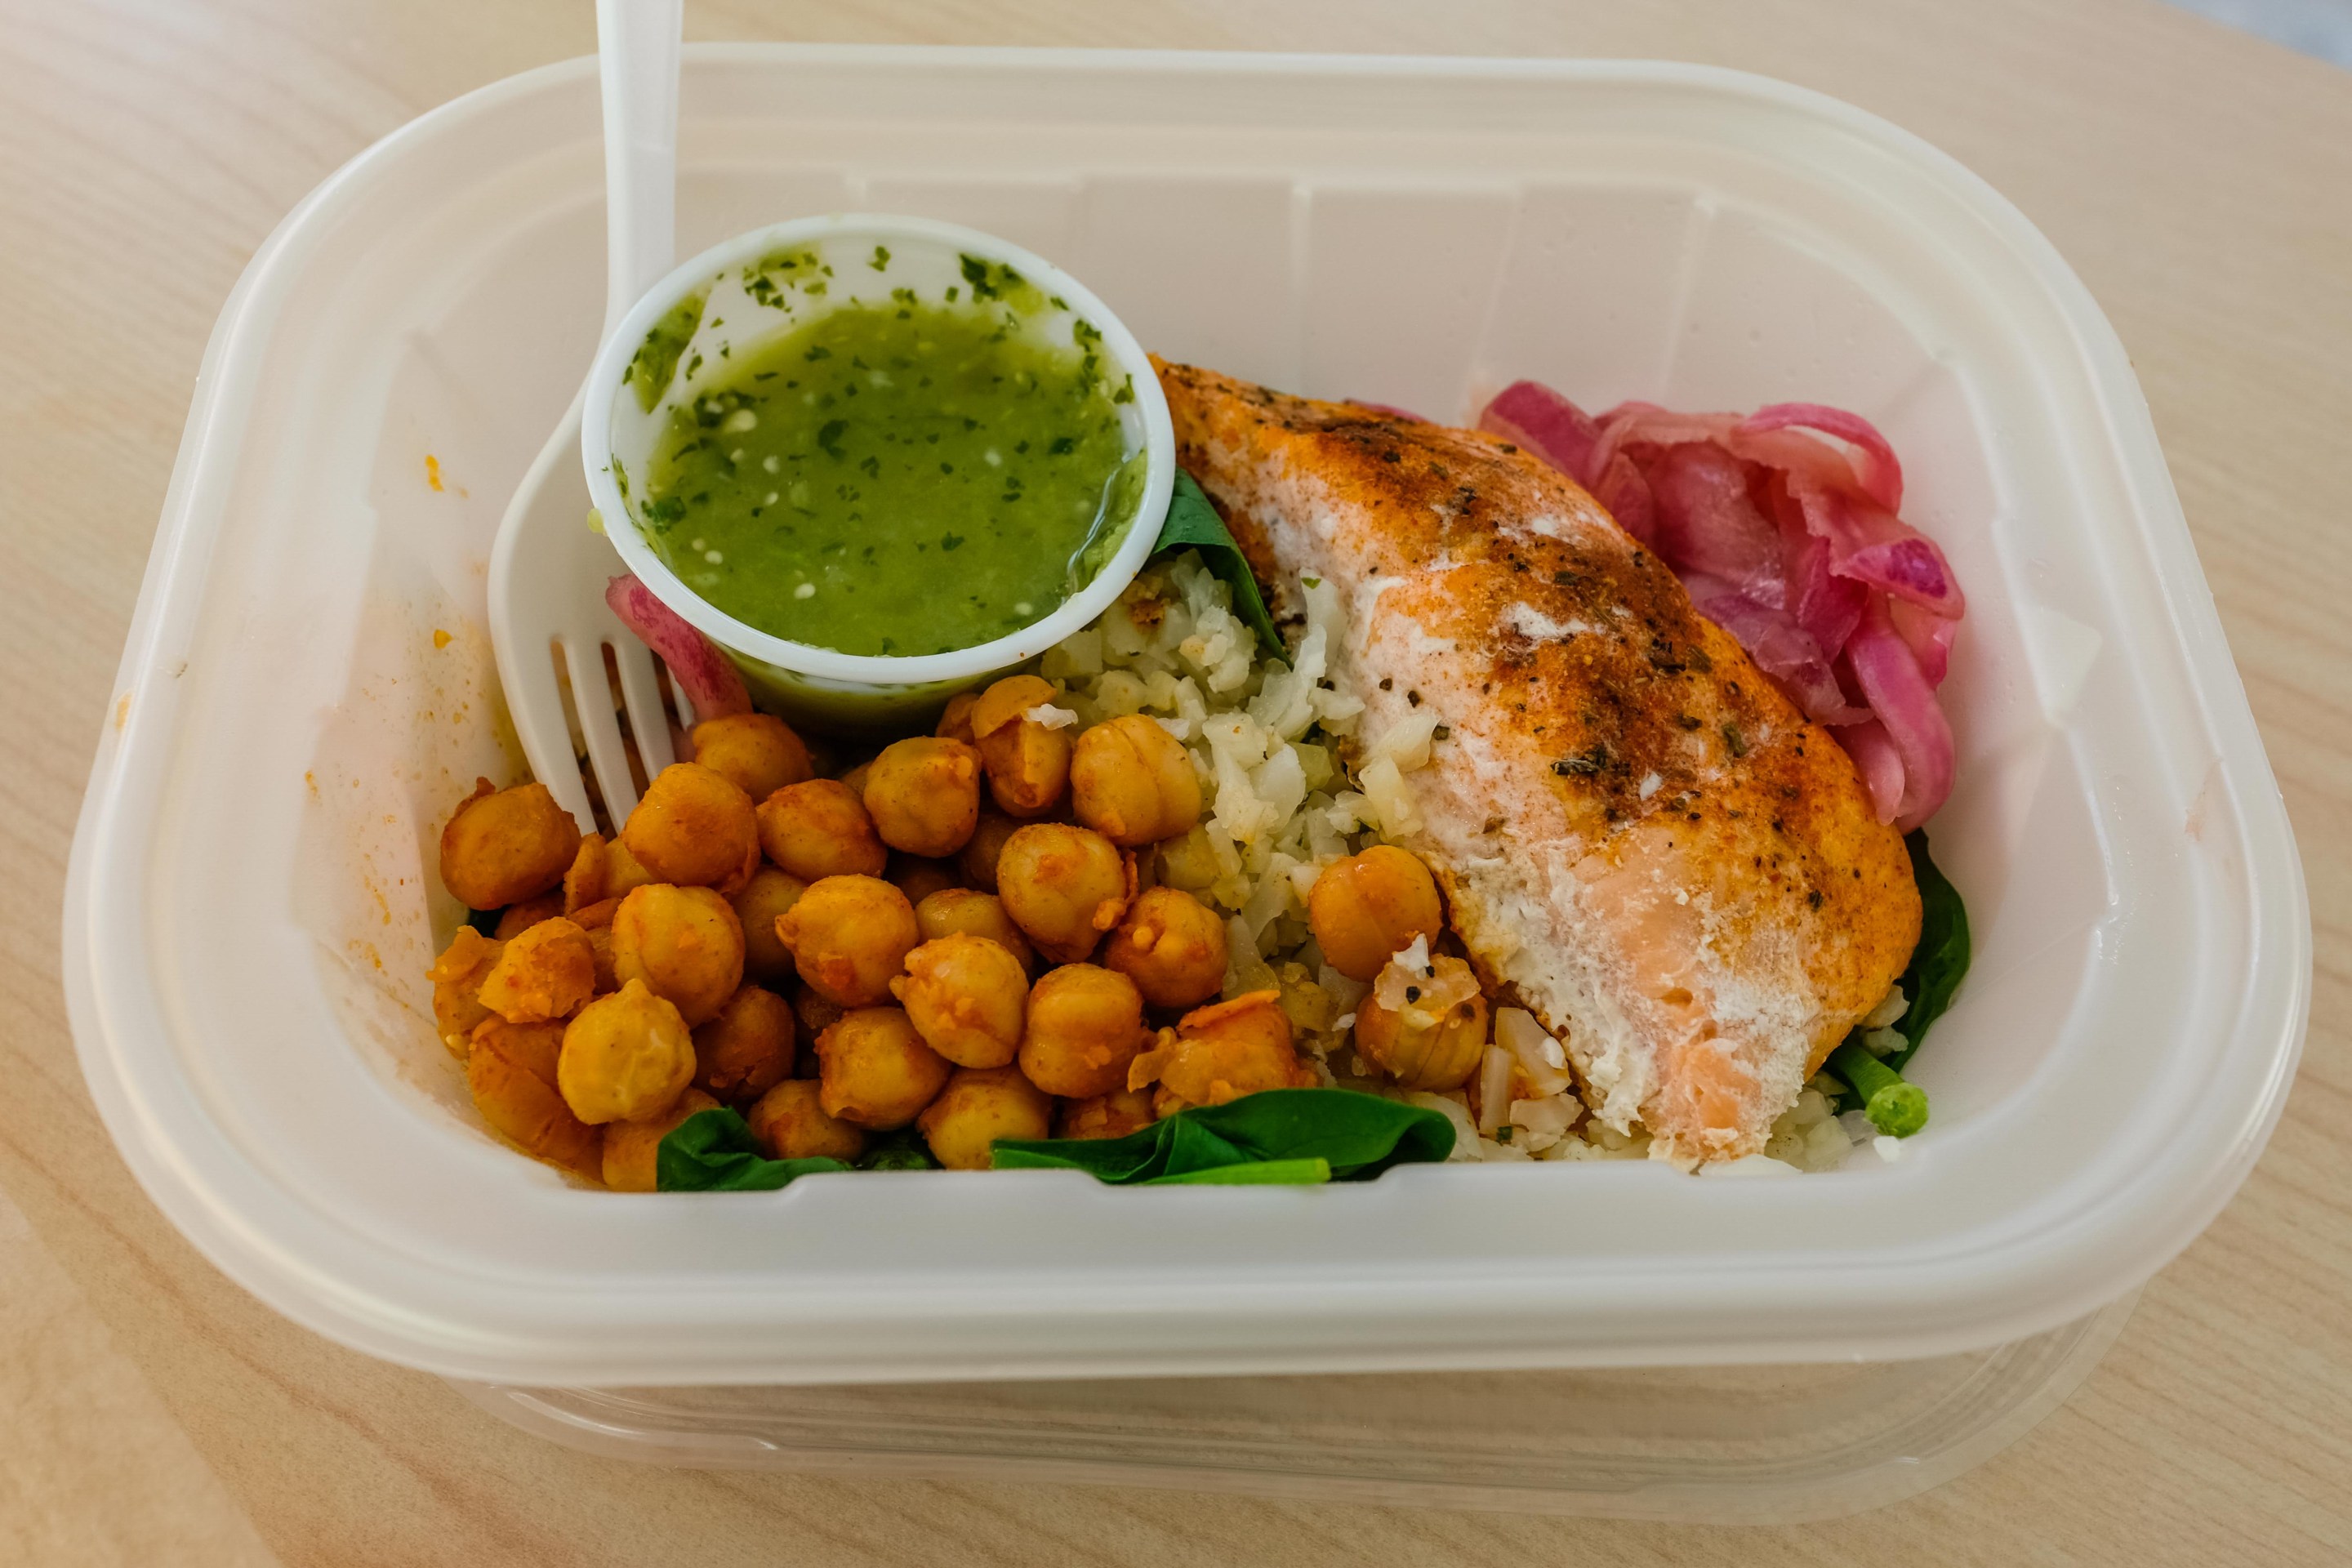 Chickpeas, sauce, and salmon sit in a tray at the Everytable in Flatbush.